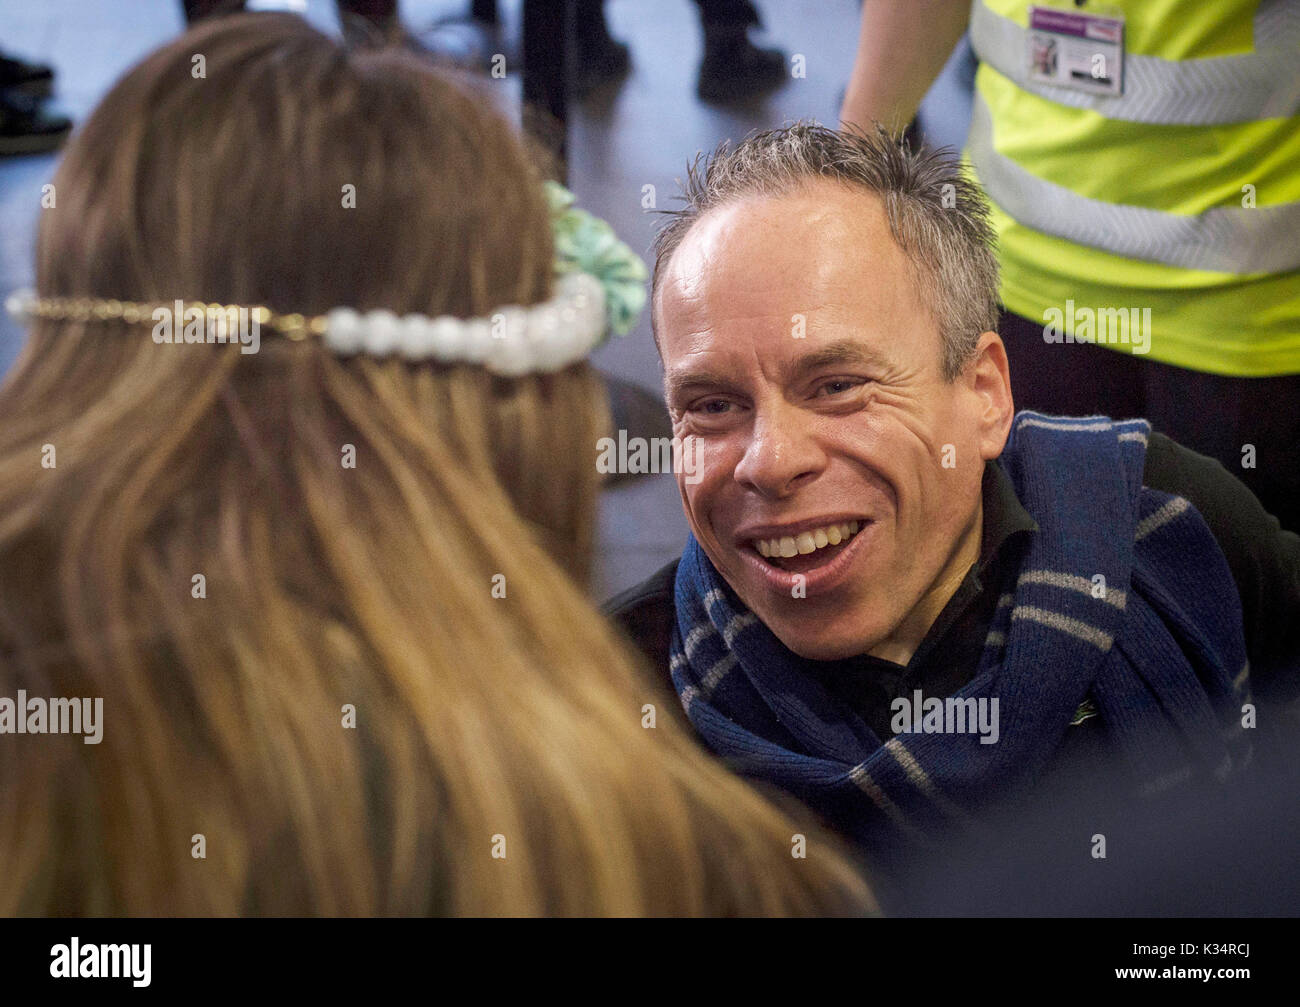 Warwick Davis, who played Professor Flitwick in the Harry Potter films, speaks to a fan at Platform 9 and 3/4 in King's Cross Station, London. Today is the day that Albus Severus Potter boarded the Hogwarts Express in the epilogue of Harry Potter And The Deathly Hallows. Stock Photo